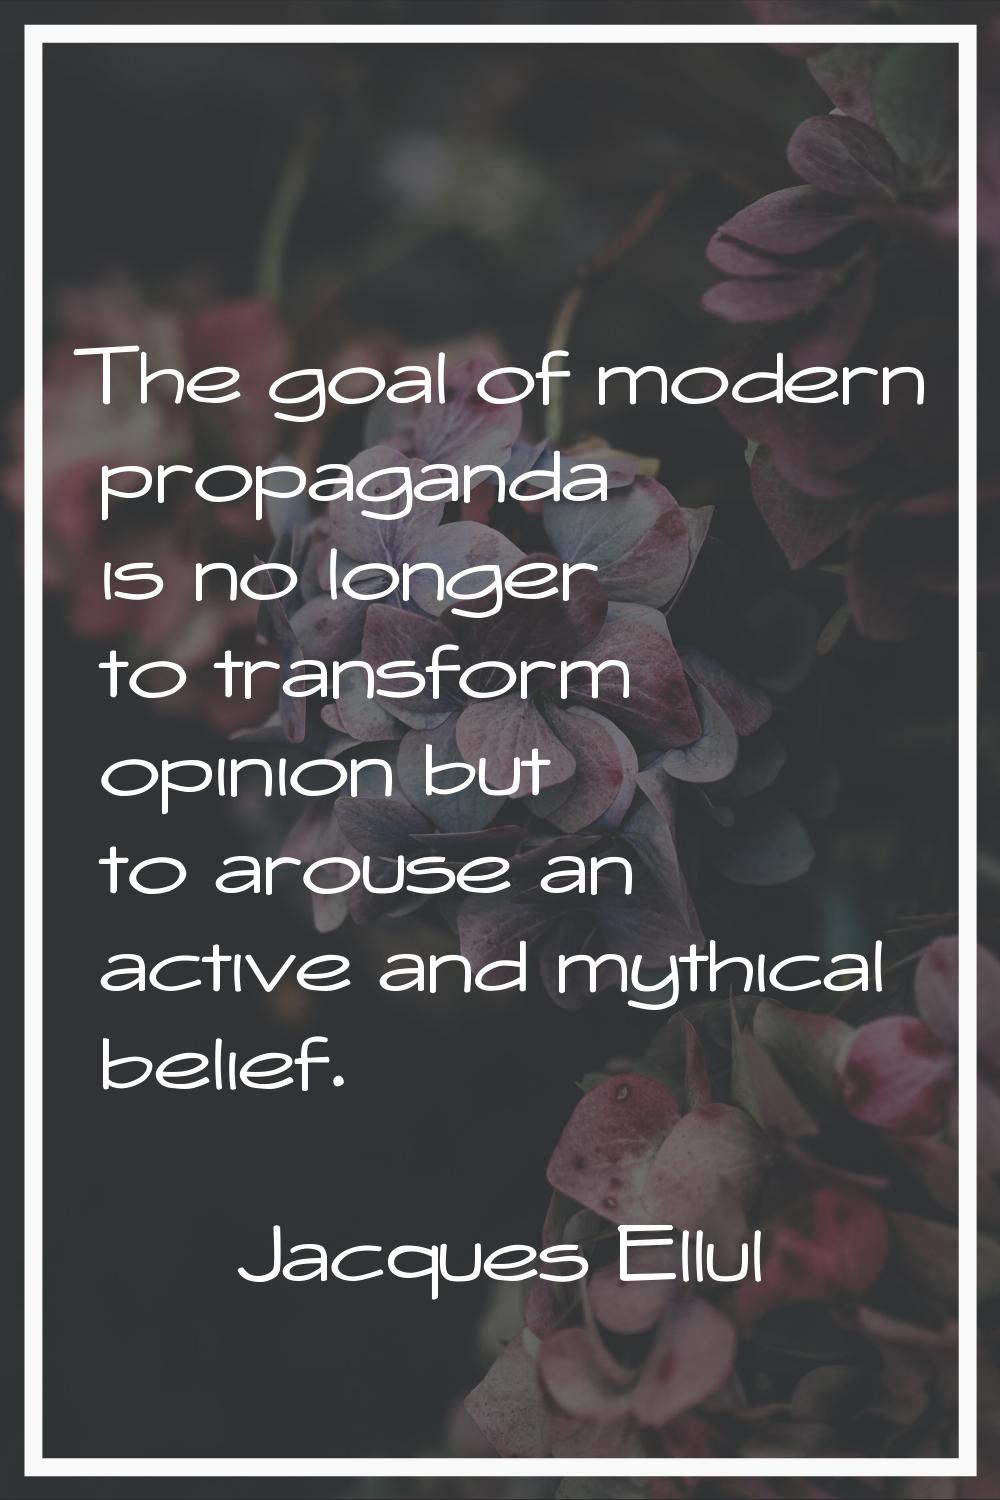 The goal of modern propaganda is no longer to transform opinion but to arouse an active and mythica